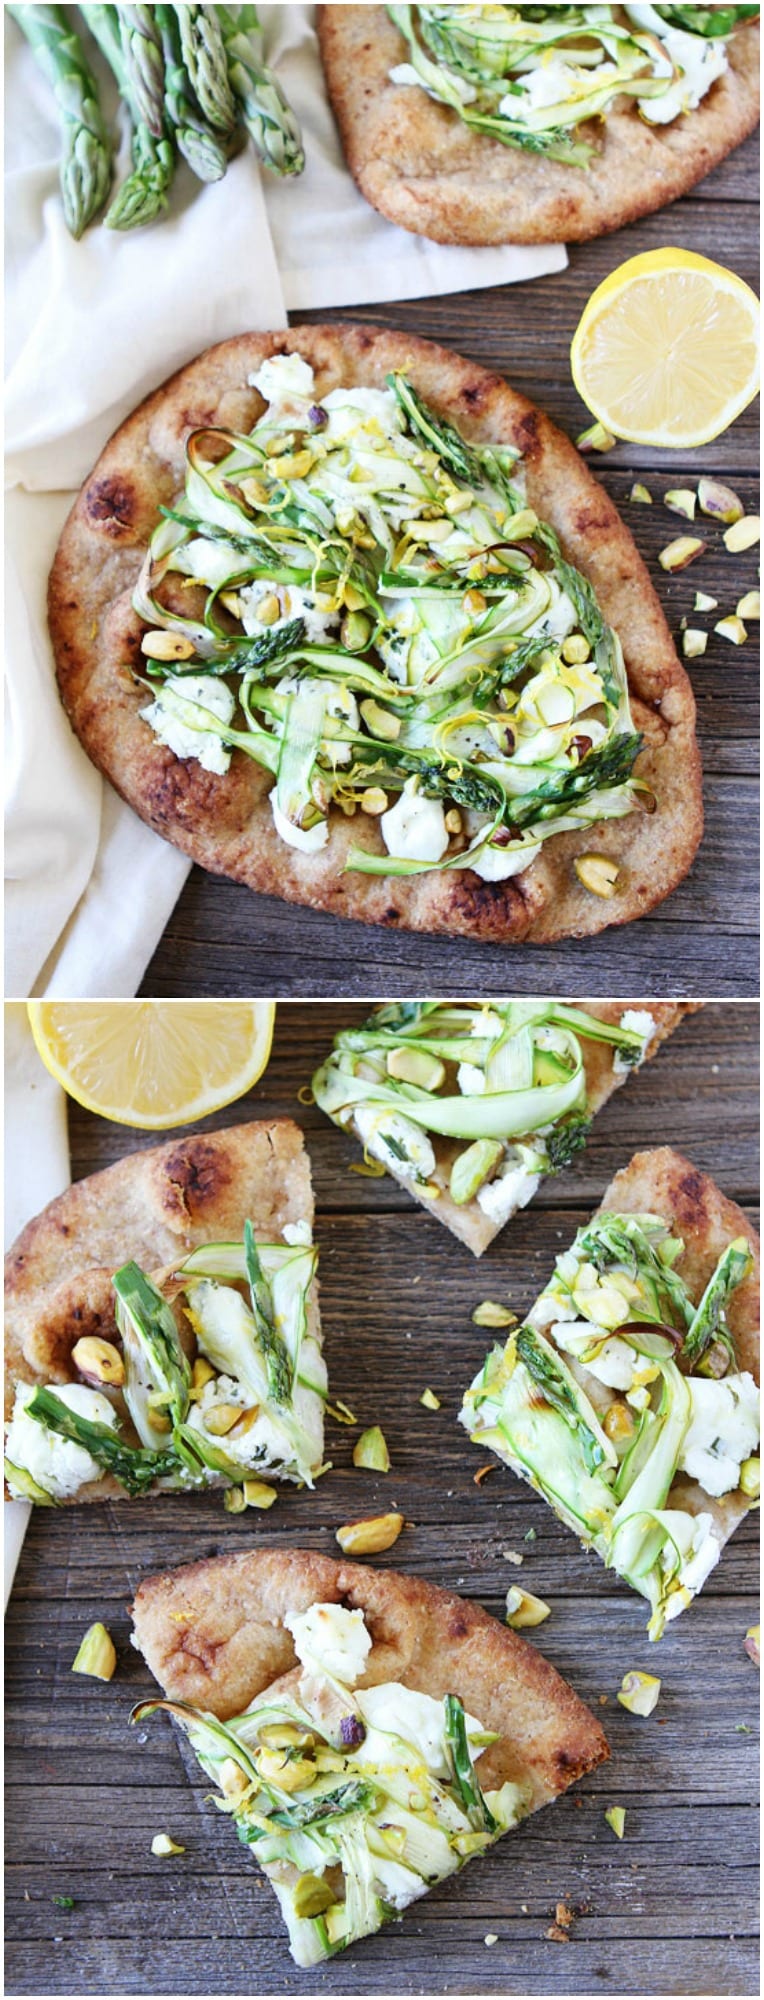 Asparagus, Goat Cheese, and Pistachio Flatbread Recipe on twopeasandtheirpod.com The perfect flatbread recipe for spring!